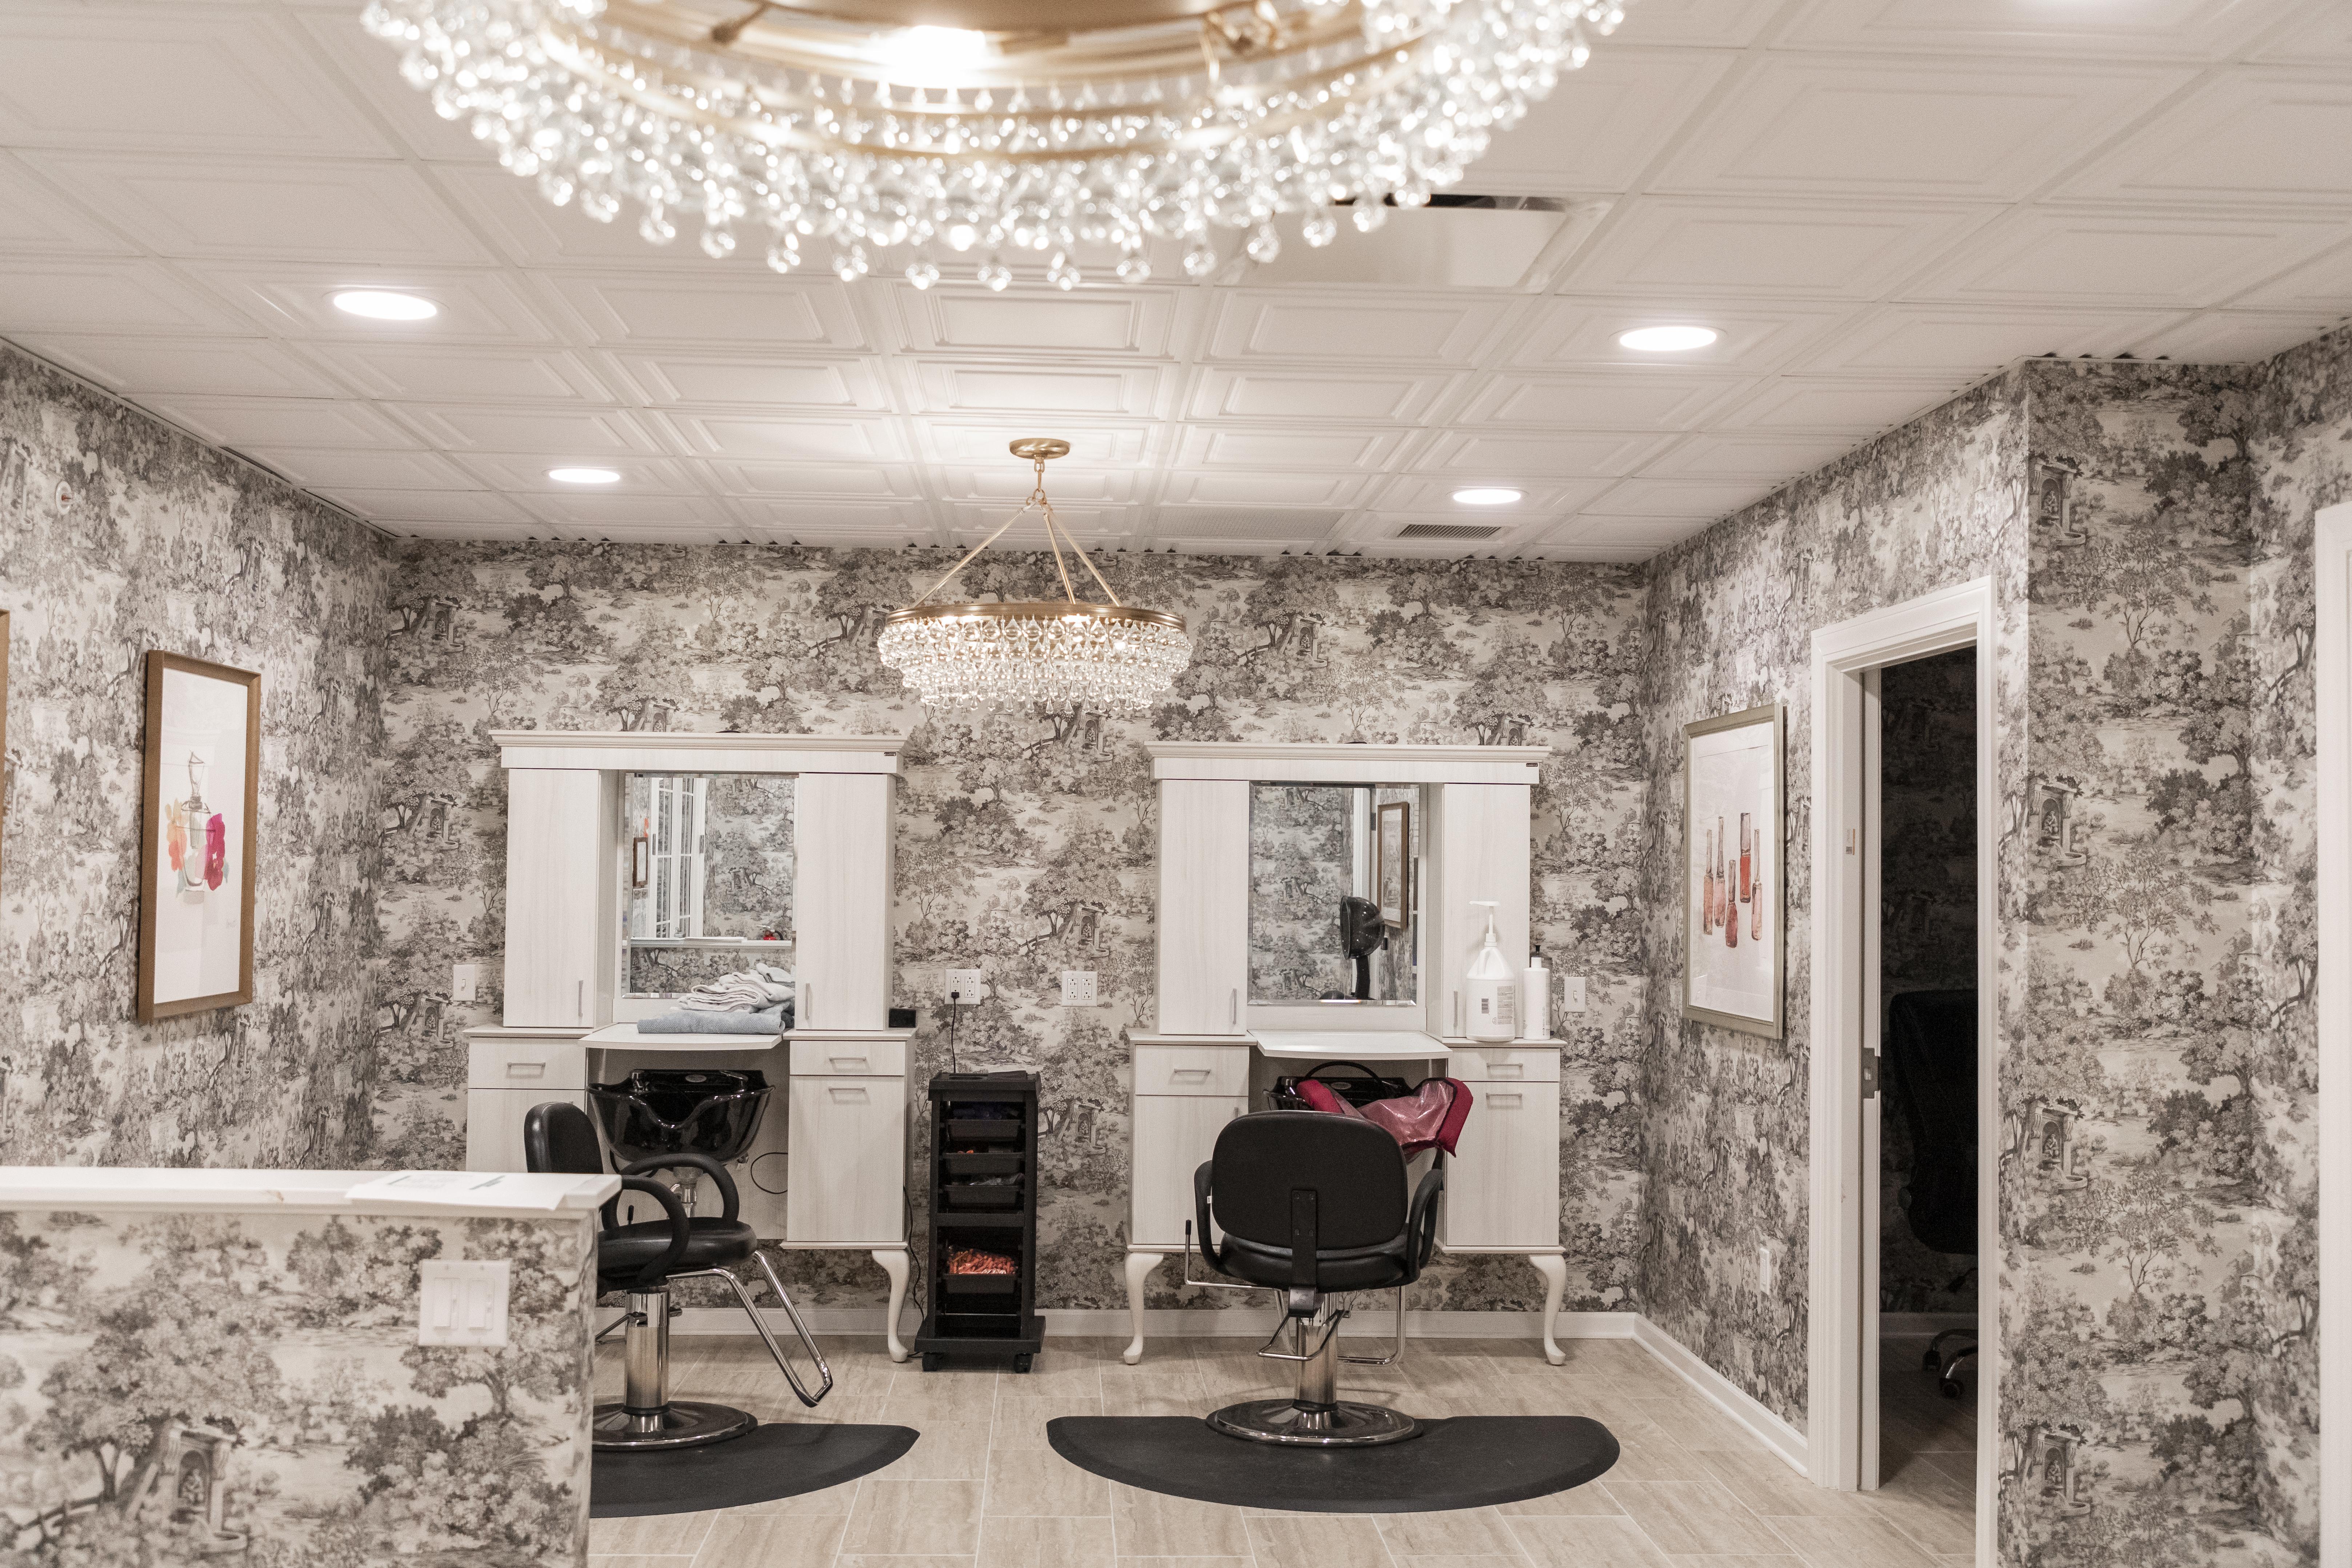 Stylish hair salon interior with ornate chandeliers, floral wallpaper, and salon chairs